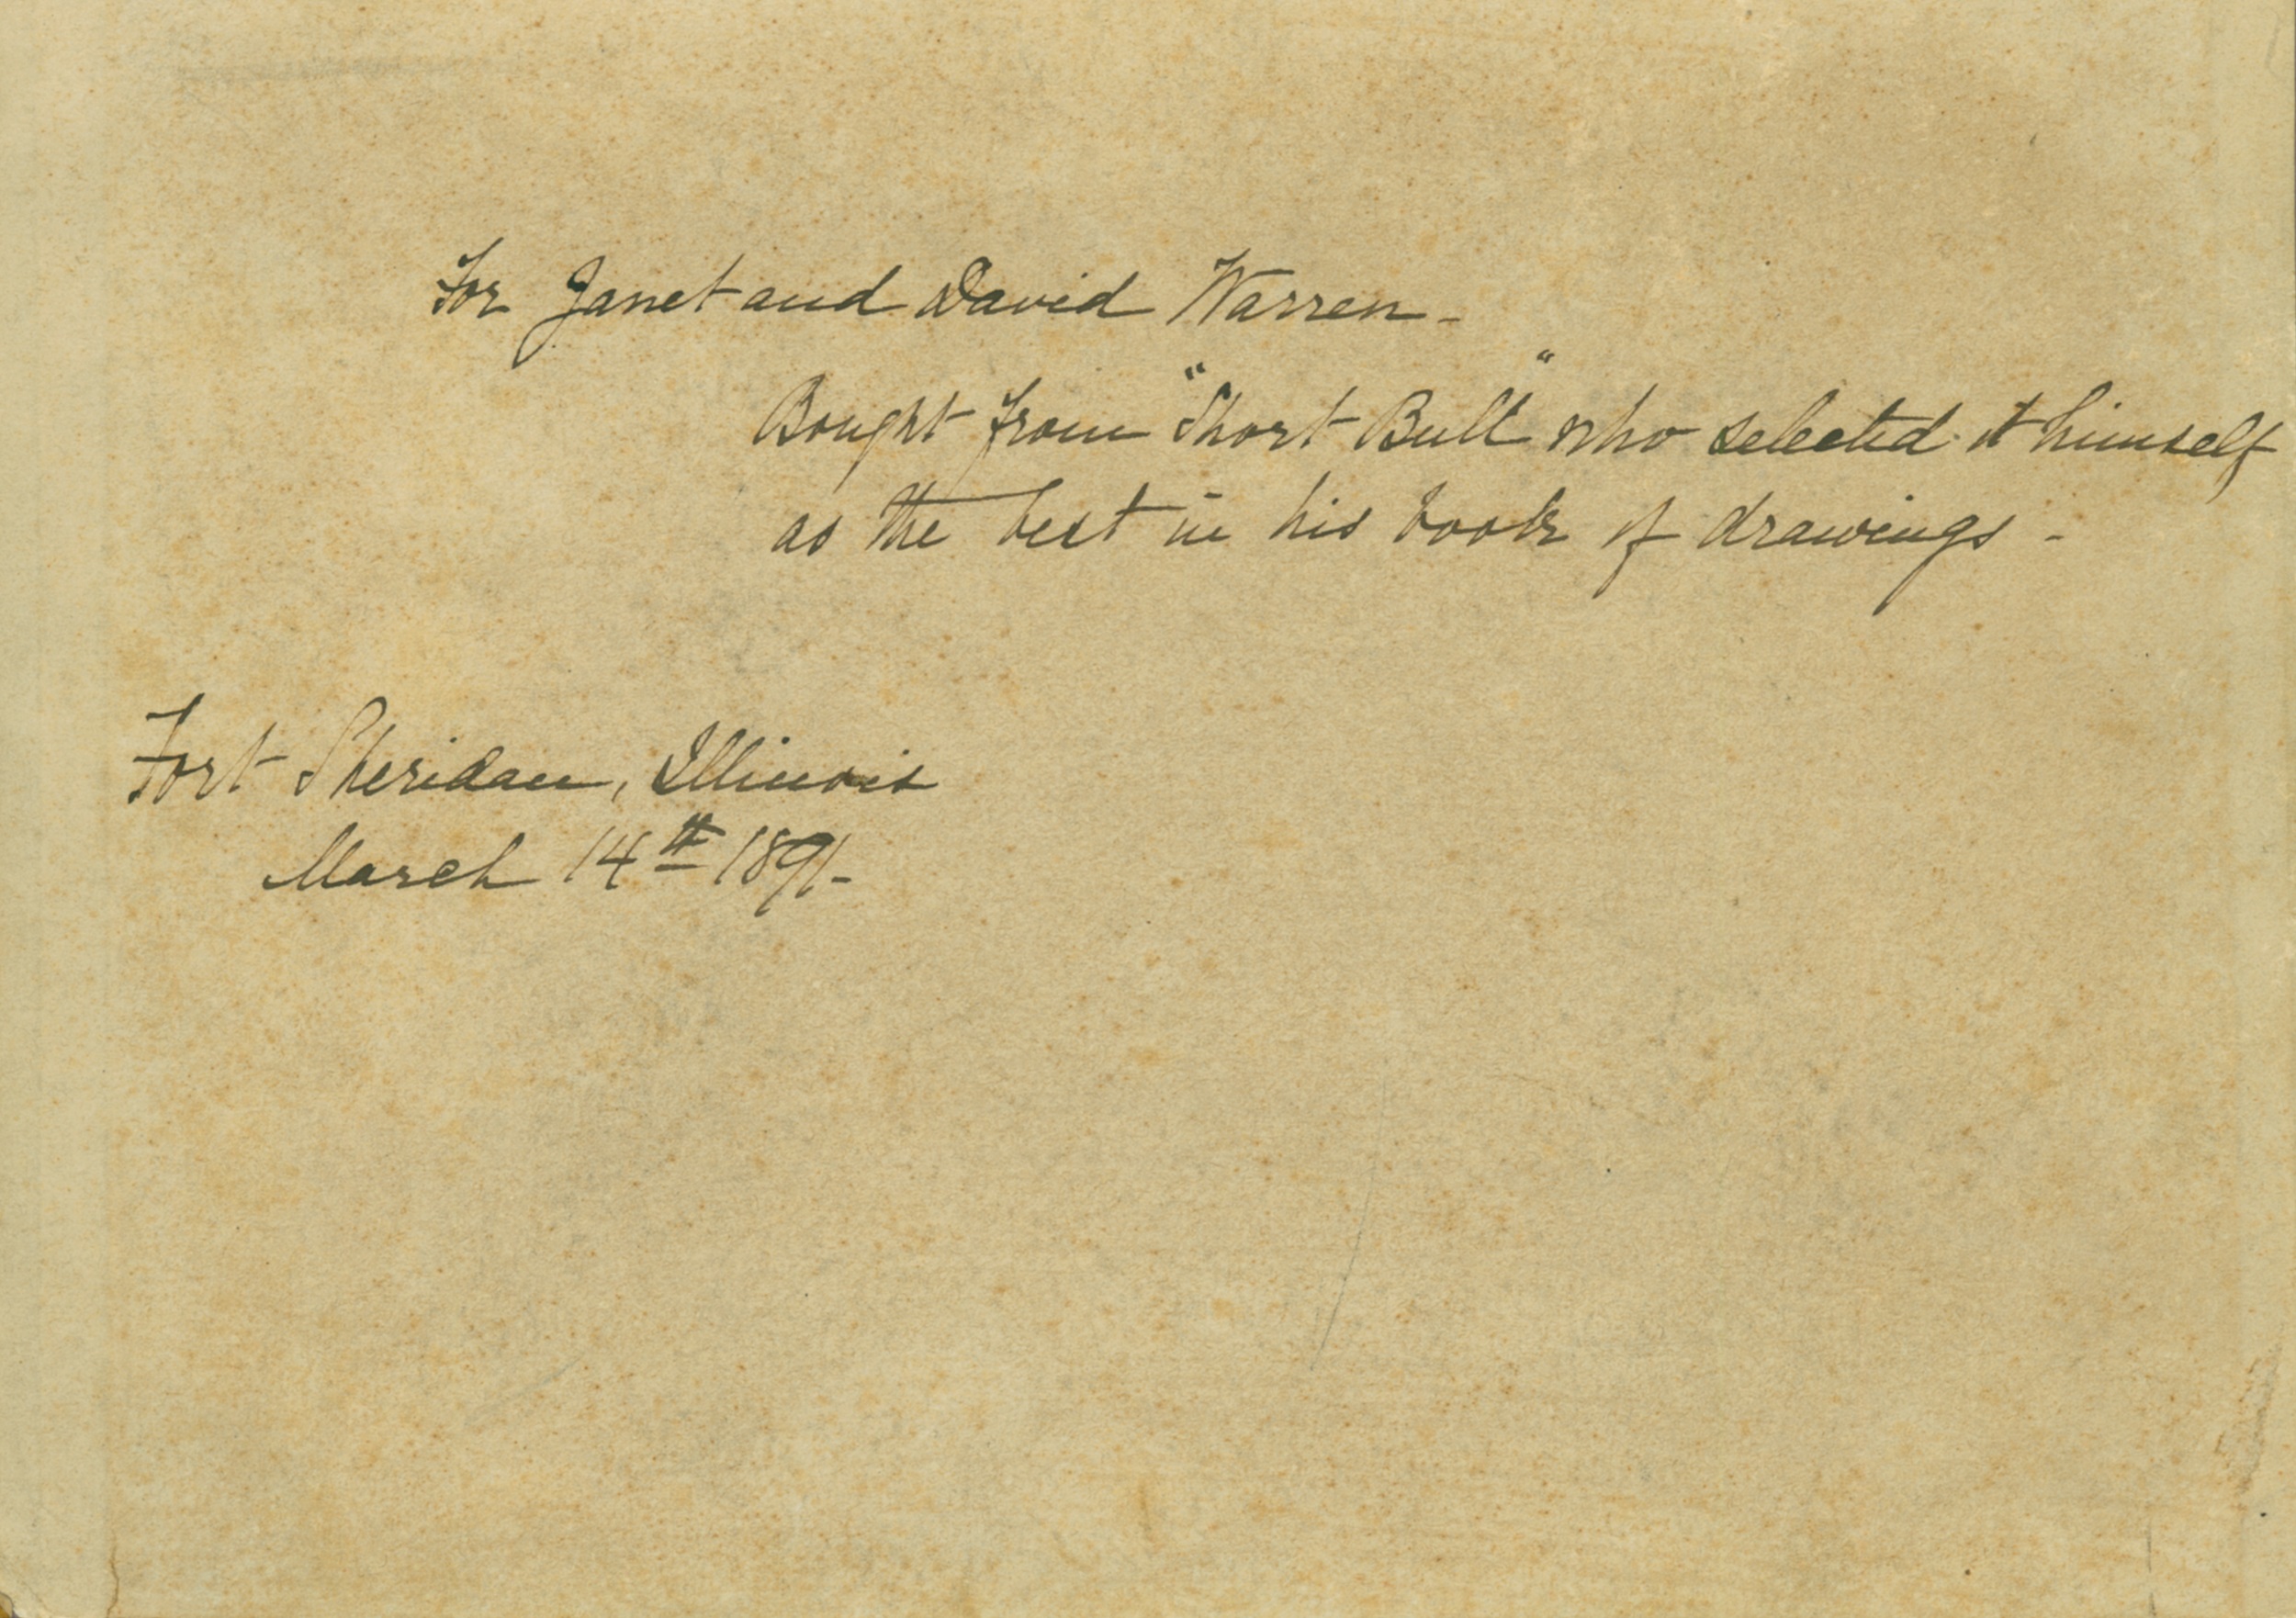 Reverse of figure 8a, with an inscription that reads "For Janet and David Warren / Bought from "Short Bull" who selected it himself / as the best in his book of drawings. / Fort Sheridan, Illinois / March 14th 1891."